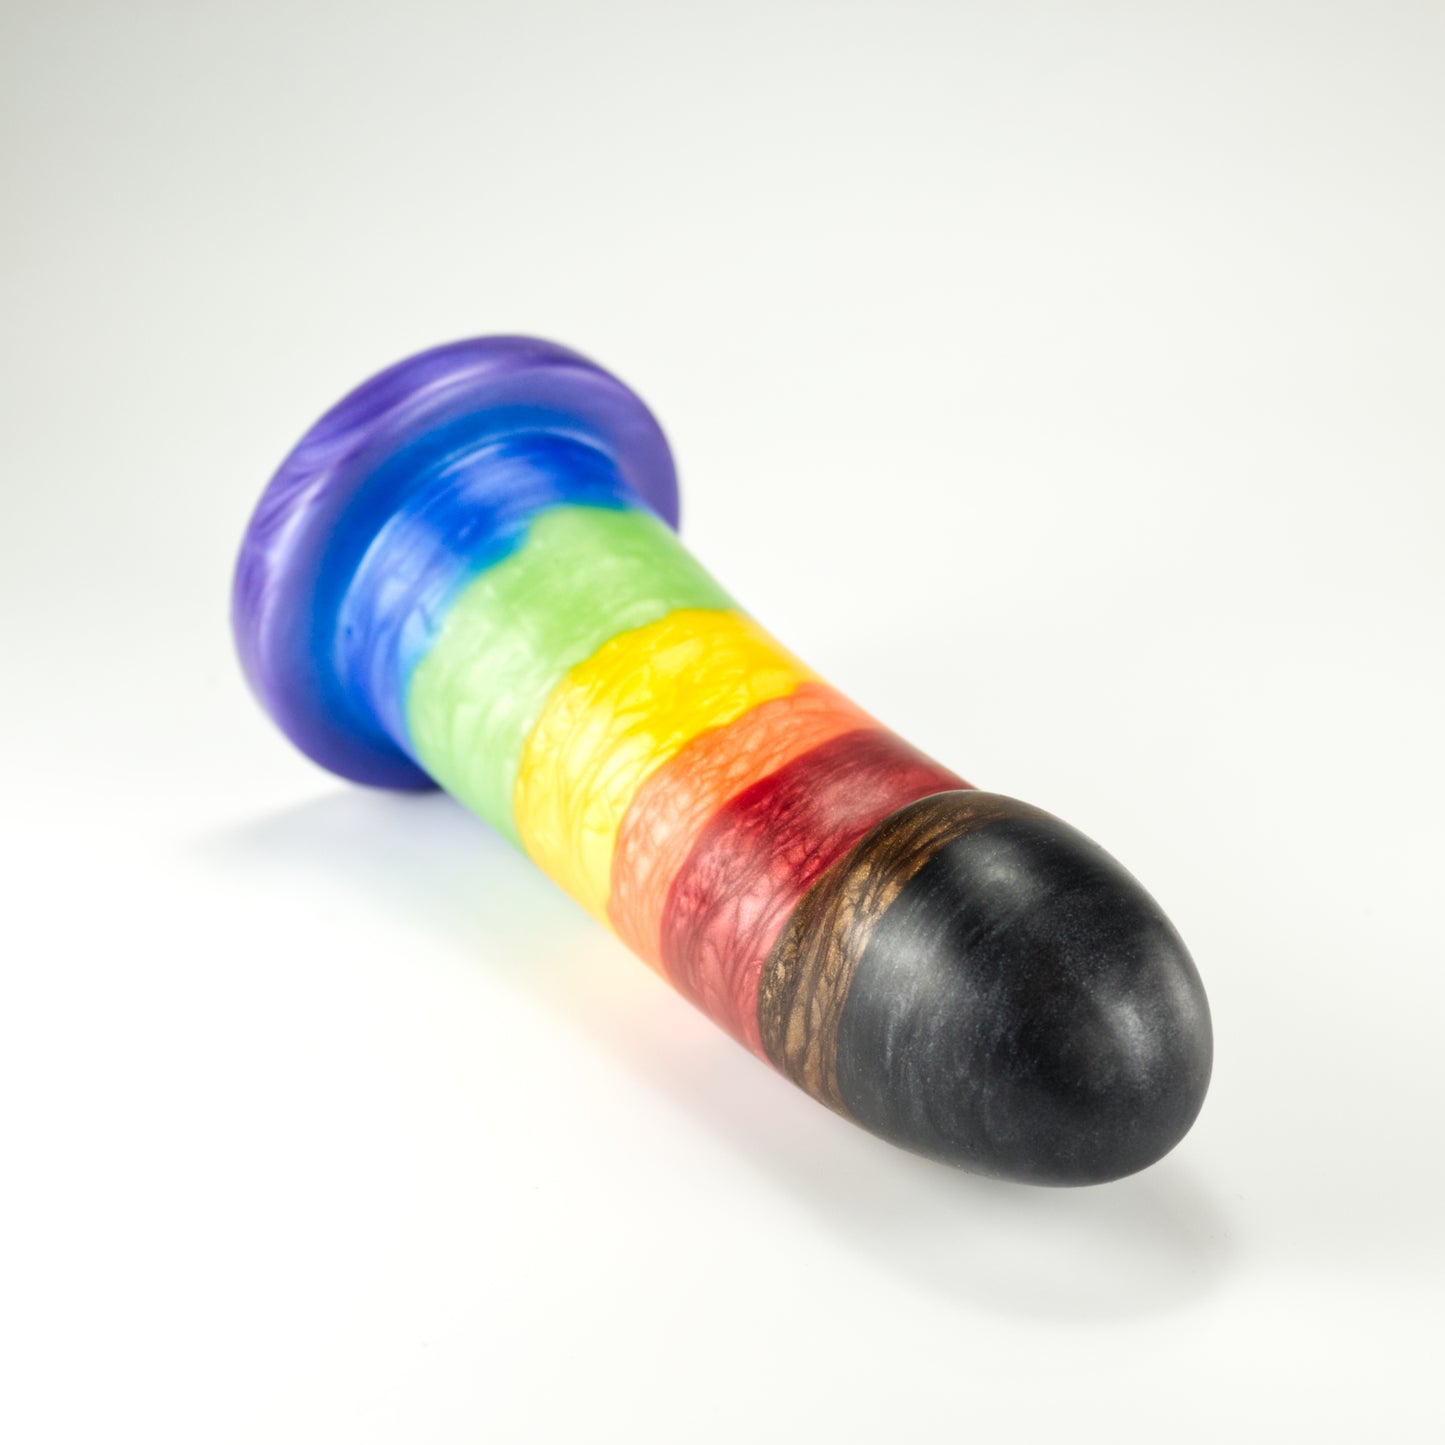 Top view of the Sidekick Large, a dildo with a smooth cylinder shaped body, and a fingertip-shaped tip, and a pronounced cliff shape where they meet. The color is rainbow stripe with additional black and brown stripes at tip.